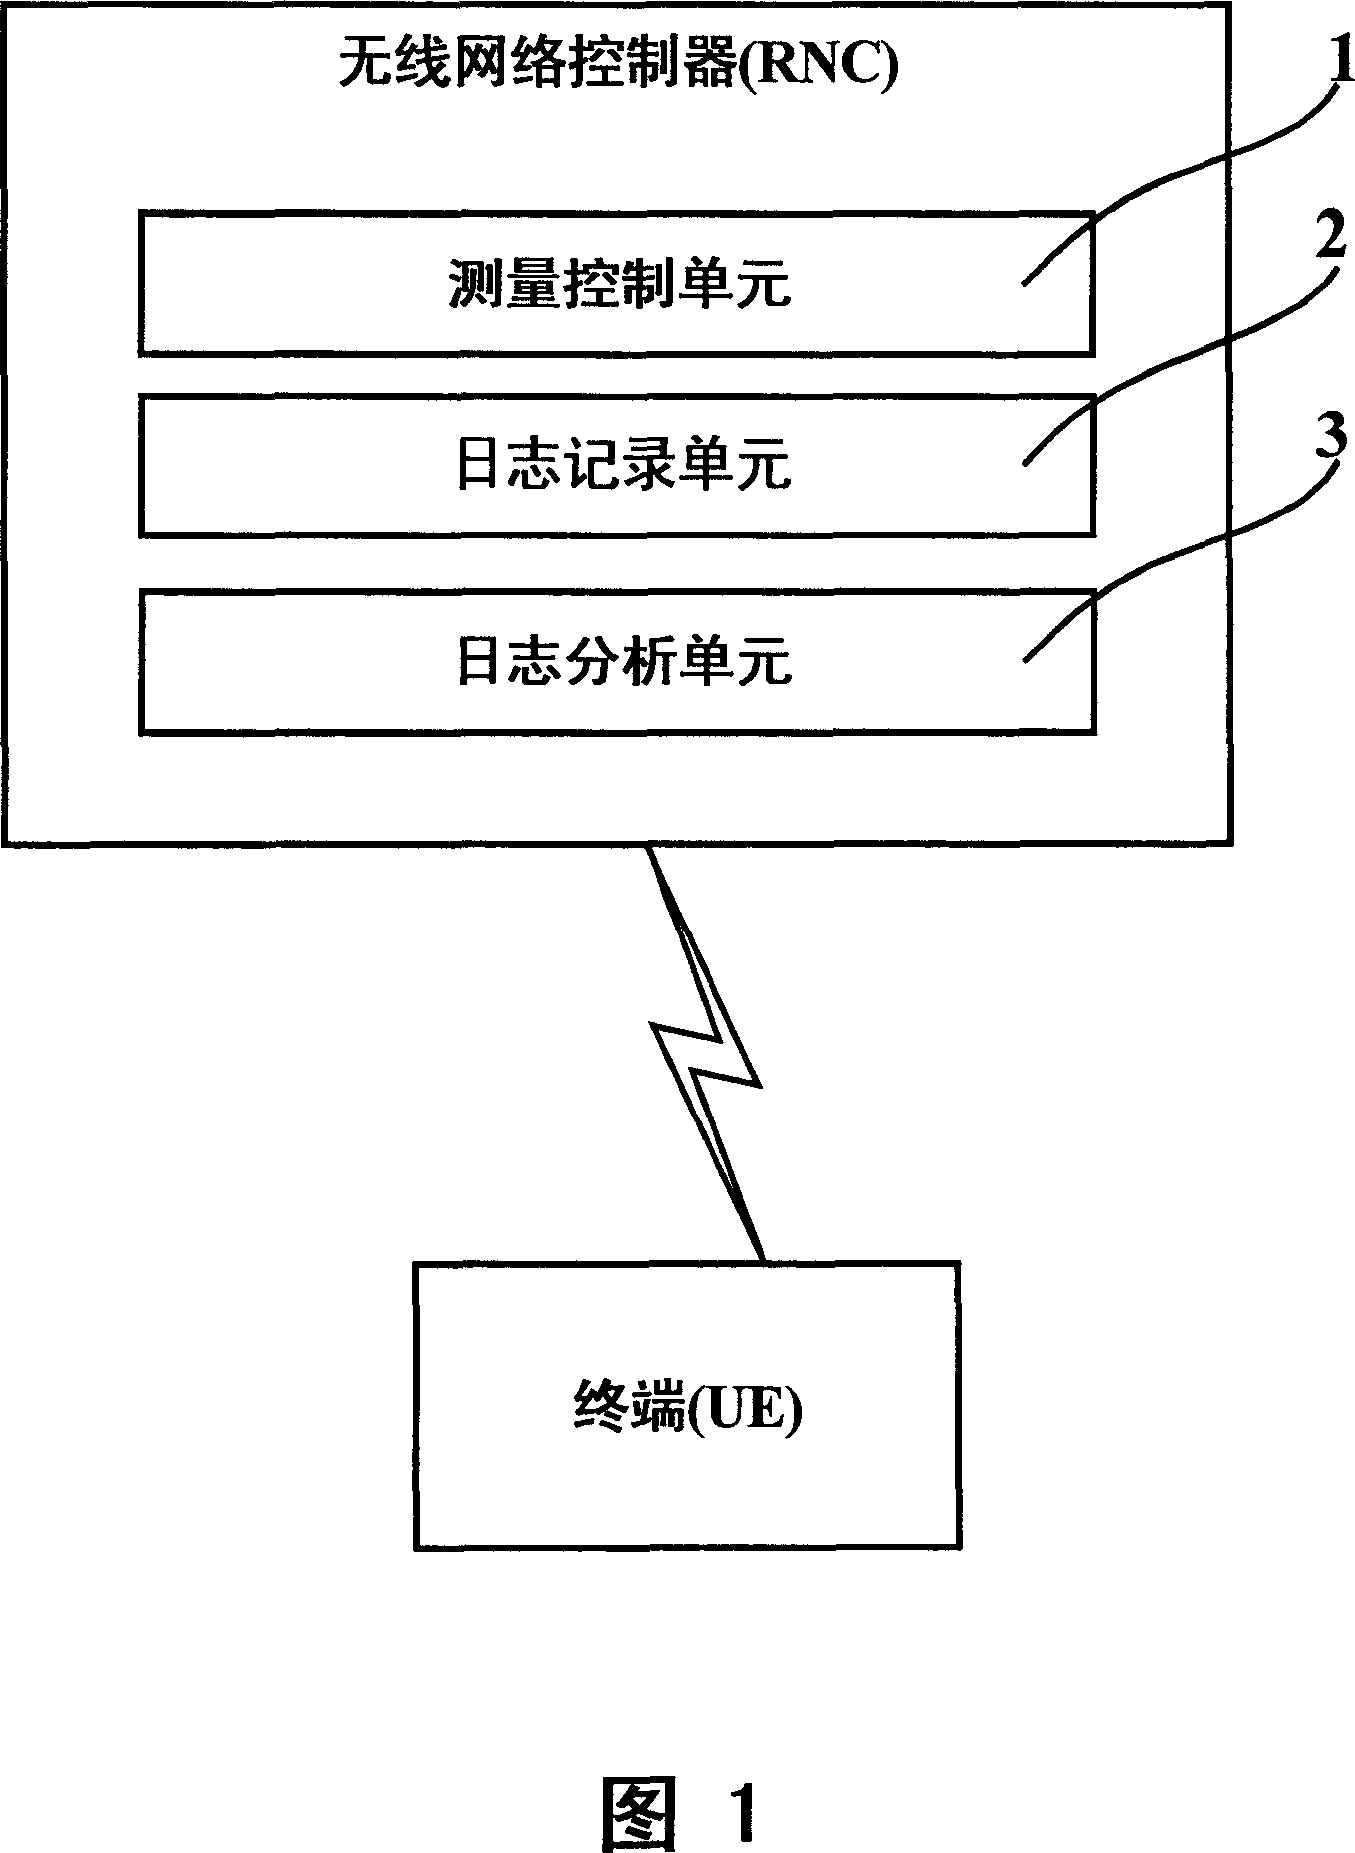 Method and system for optimizing homogeneous-frequency adjacent-domain configuration